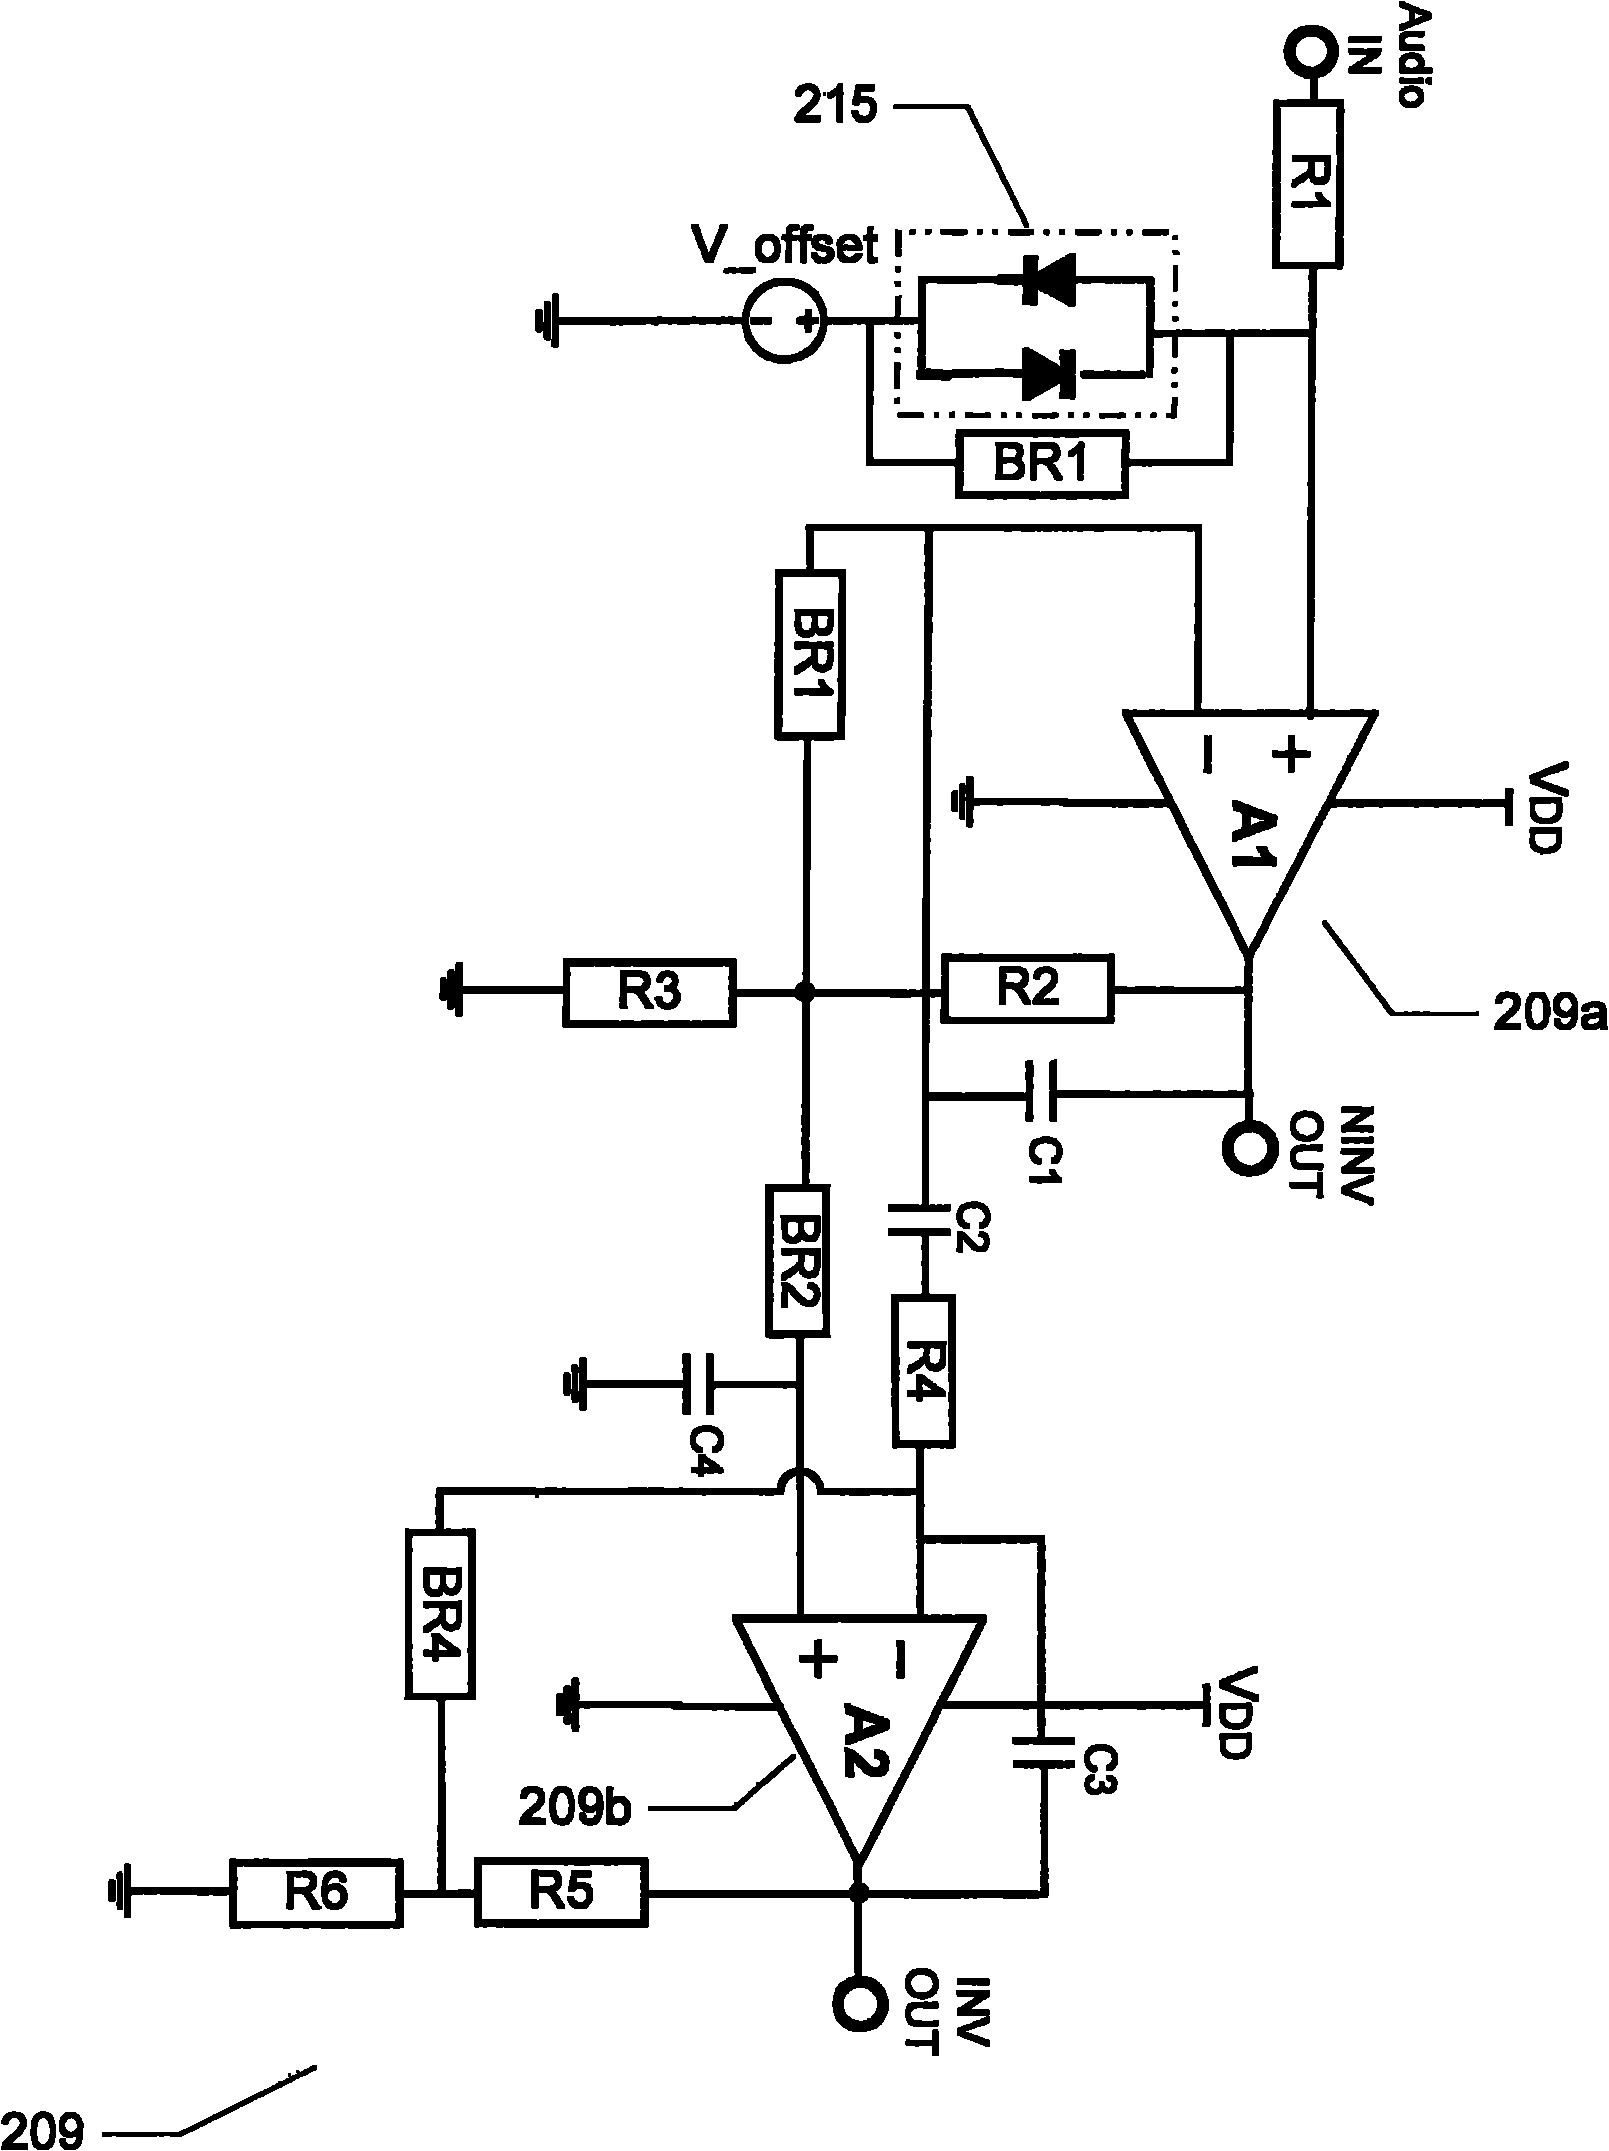 High performance voice frequency amplifying circuit